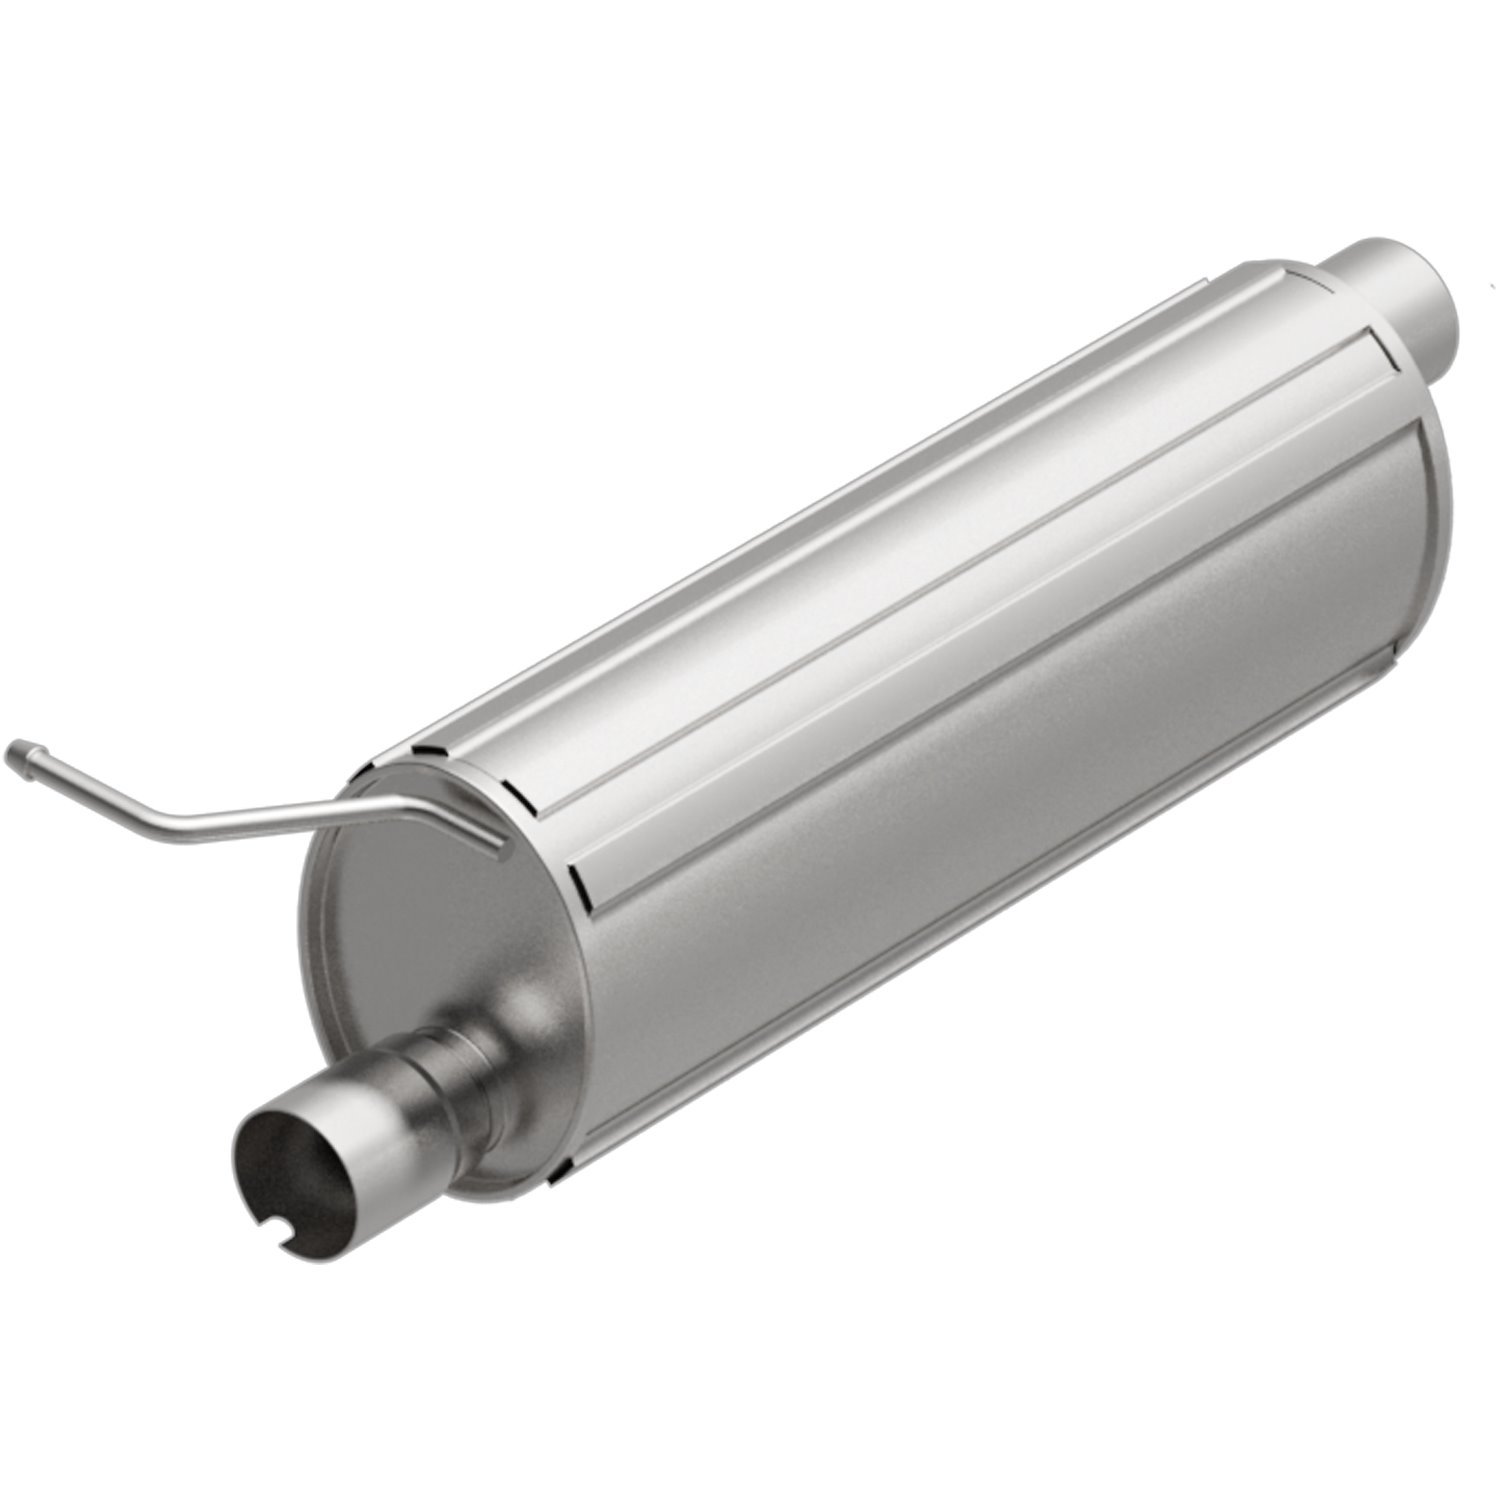 Direct-Fit Exhaust Muffler, 2008-2010 Ford F-250 Super-Duty/F-350